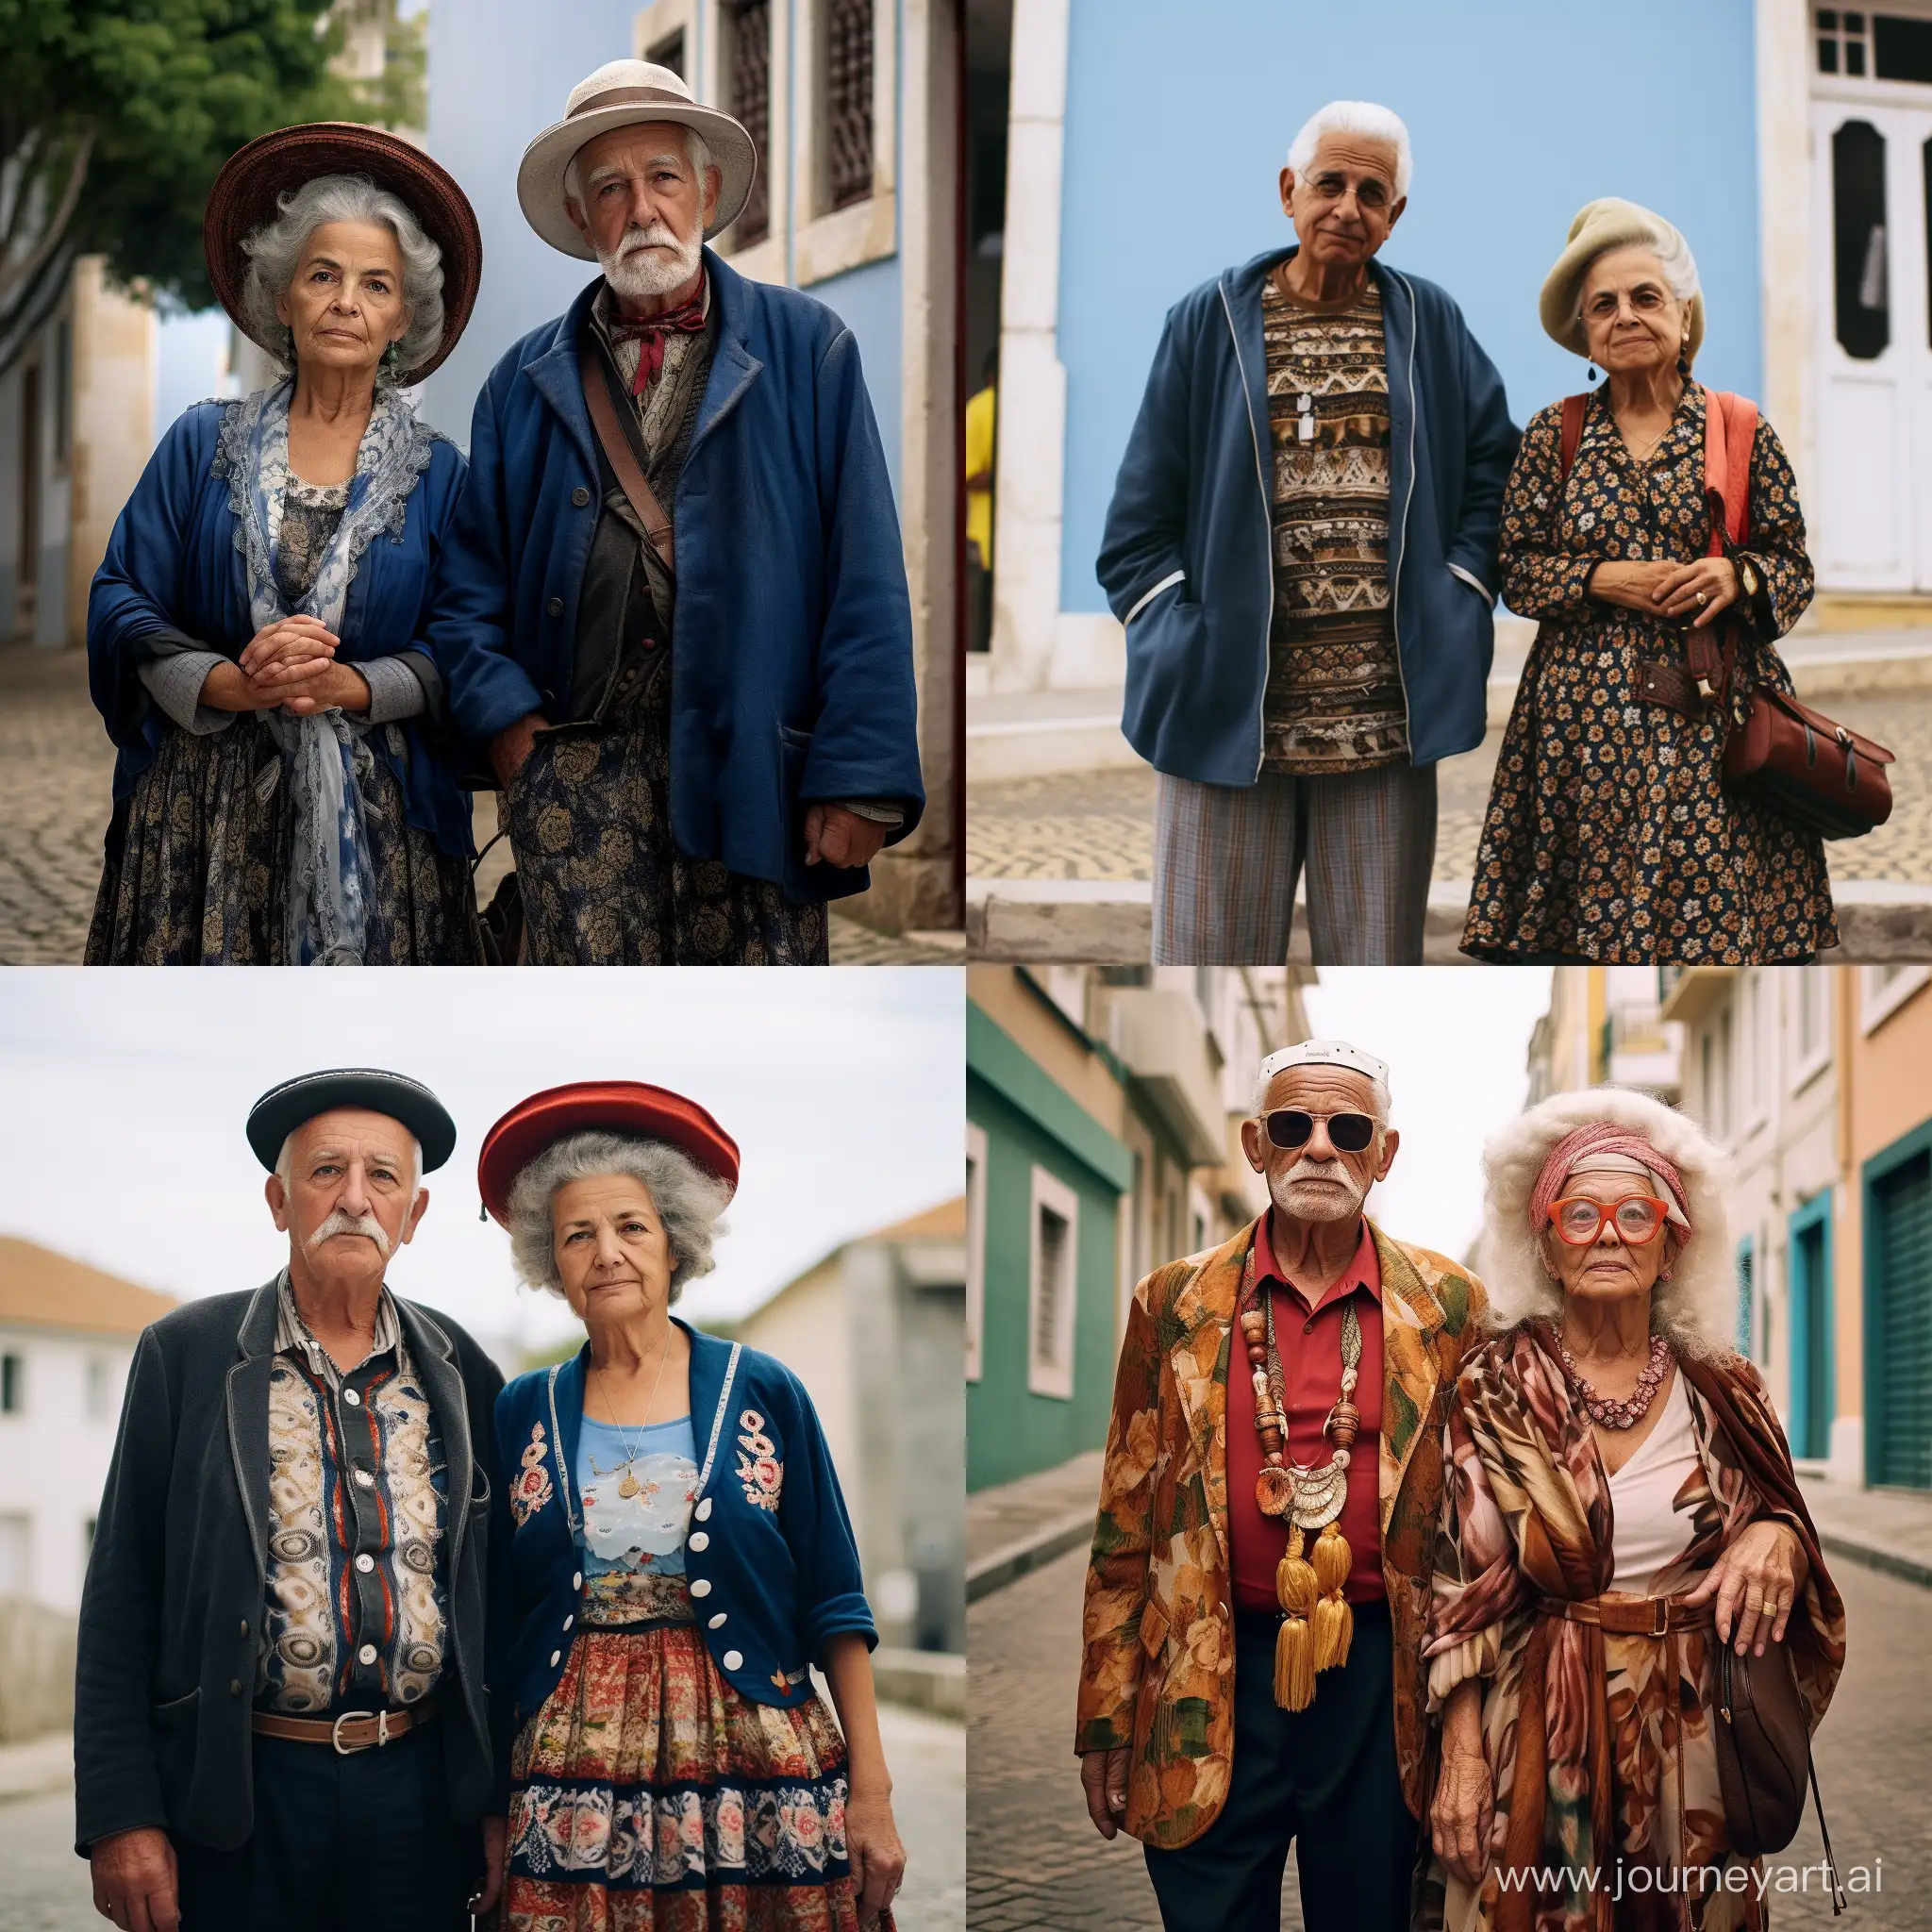 The average 60 year old man and woman from Portugal, using typical clothes, -- 400